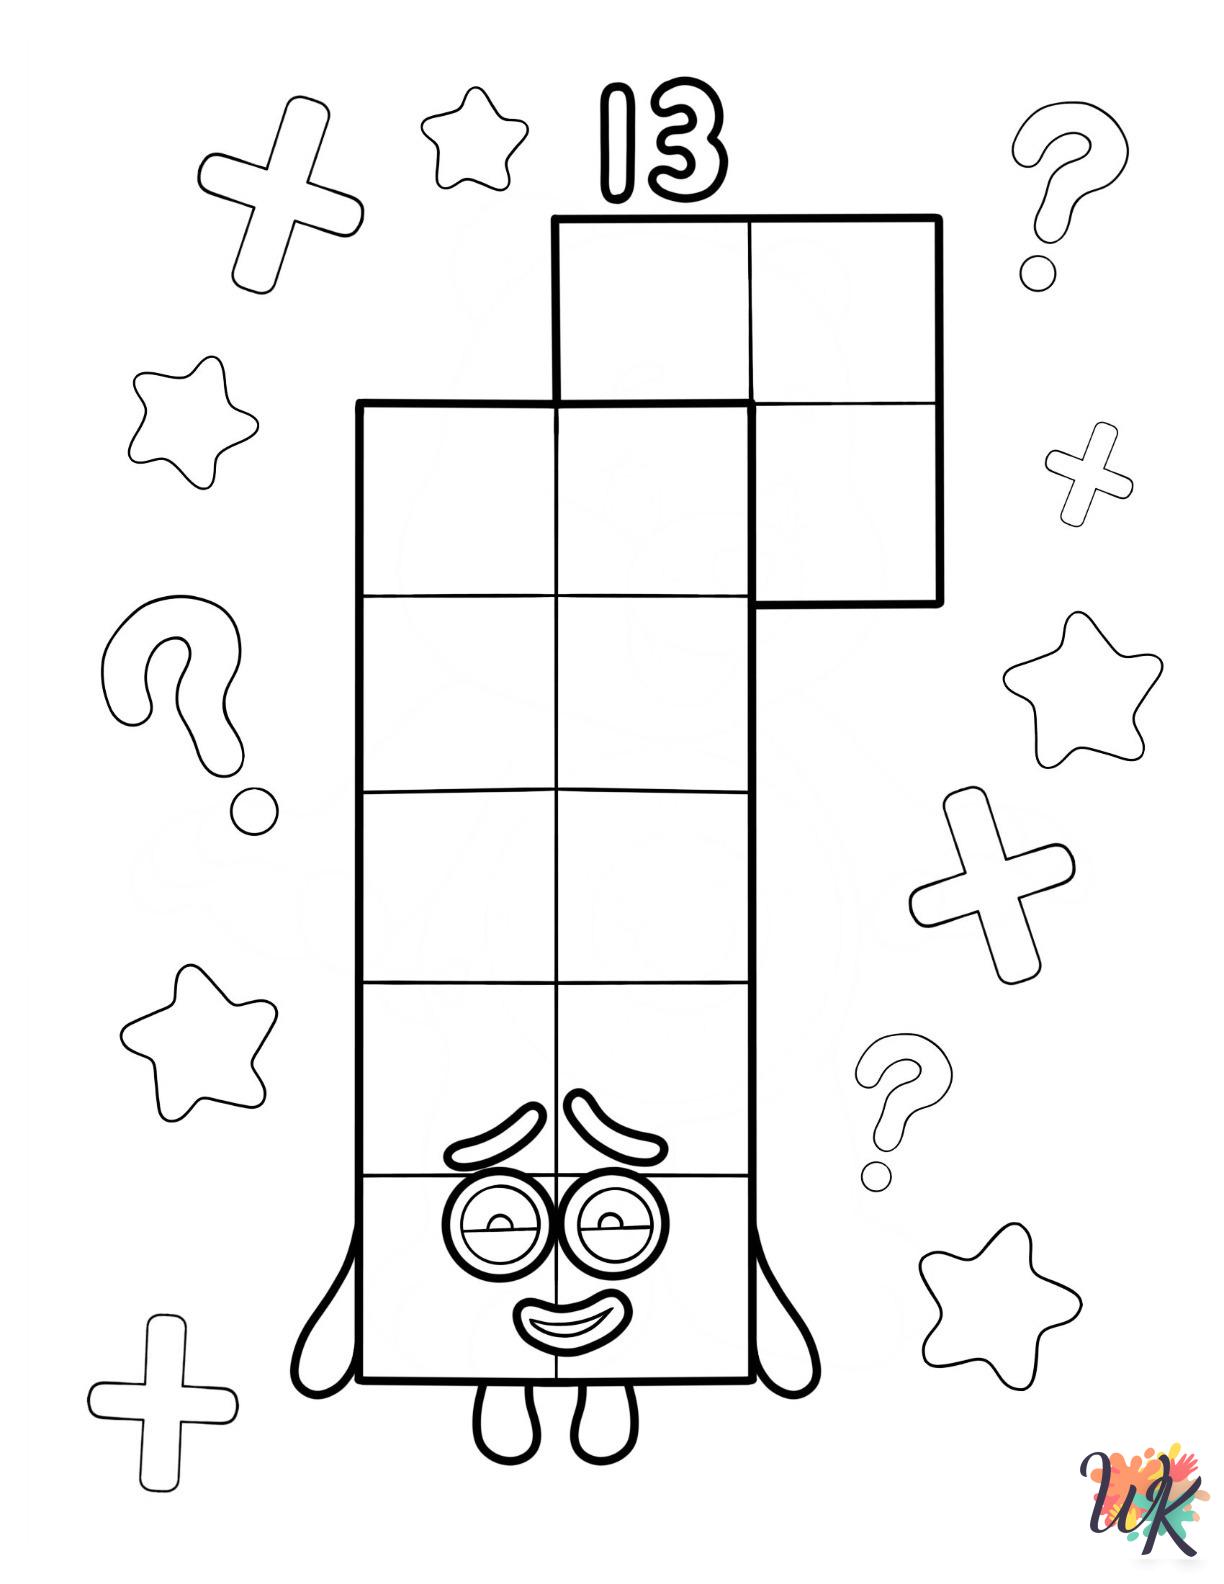 Numberblocks coloring pages for adults pdf